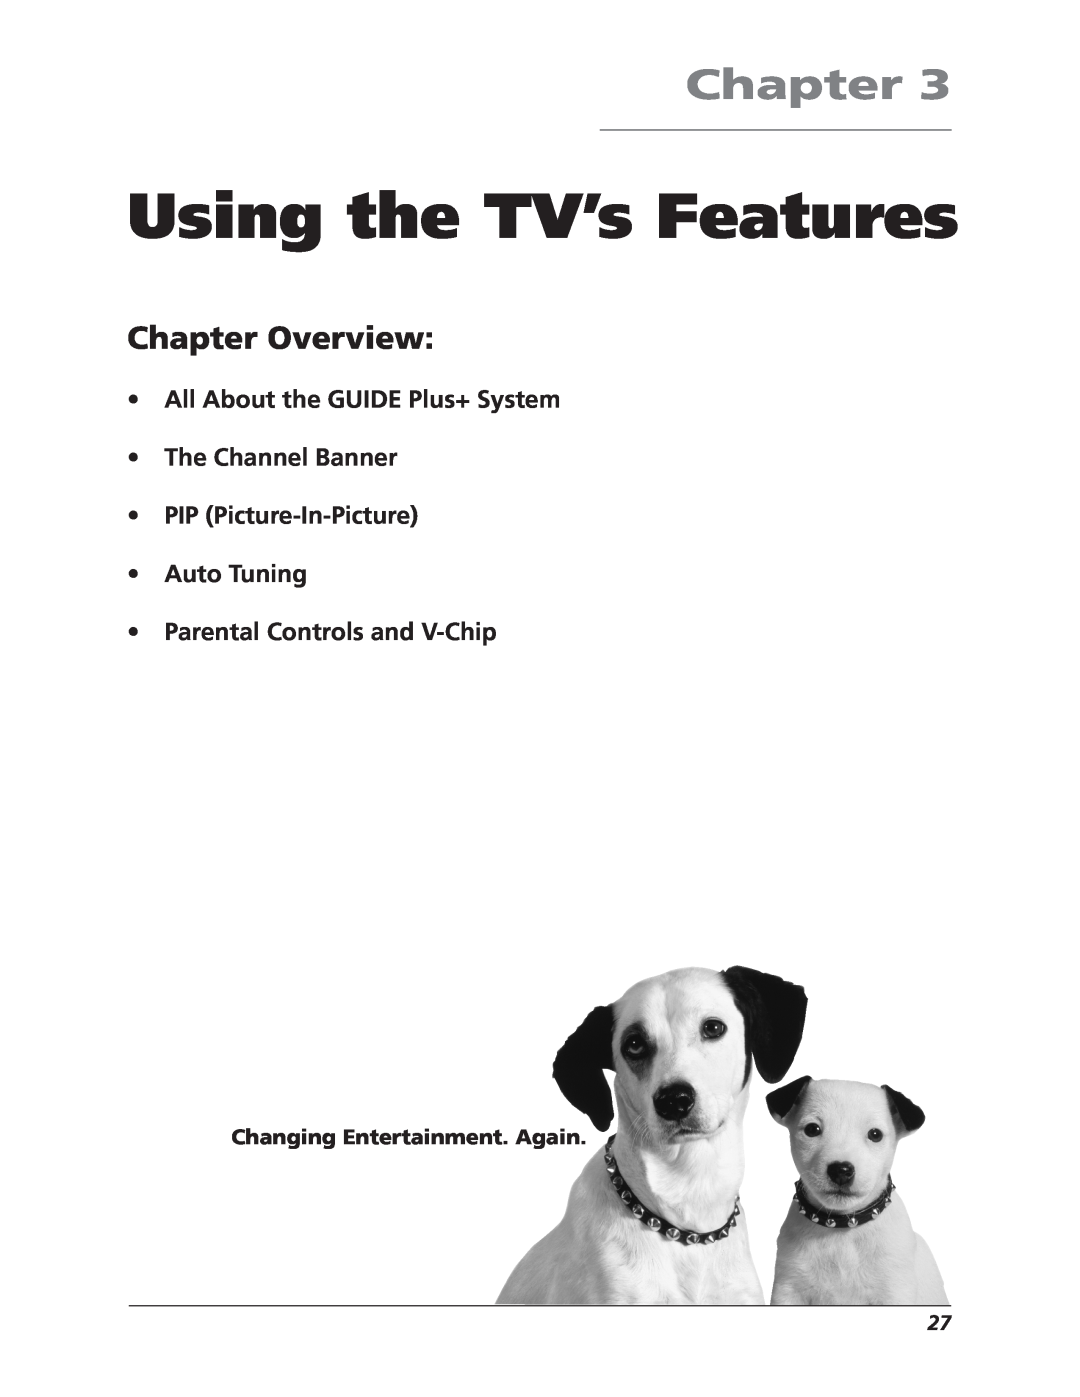 RCA F27669 manual Using the TV’s Features, All About the GUIDE Plus+ System The Channel Banner, Chapter Overview 